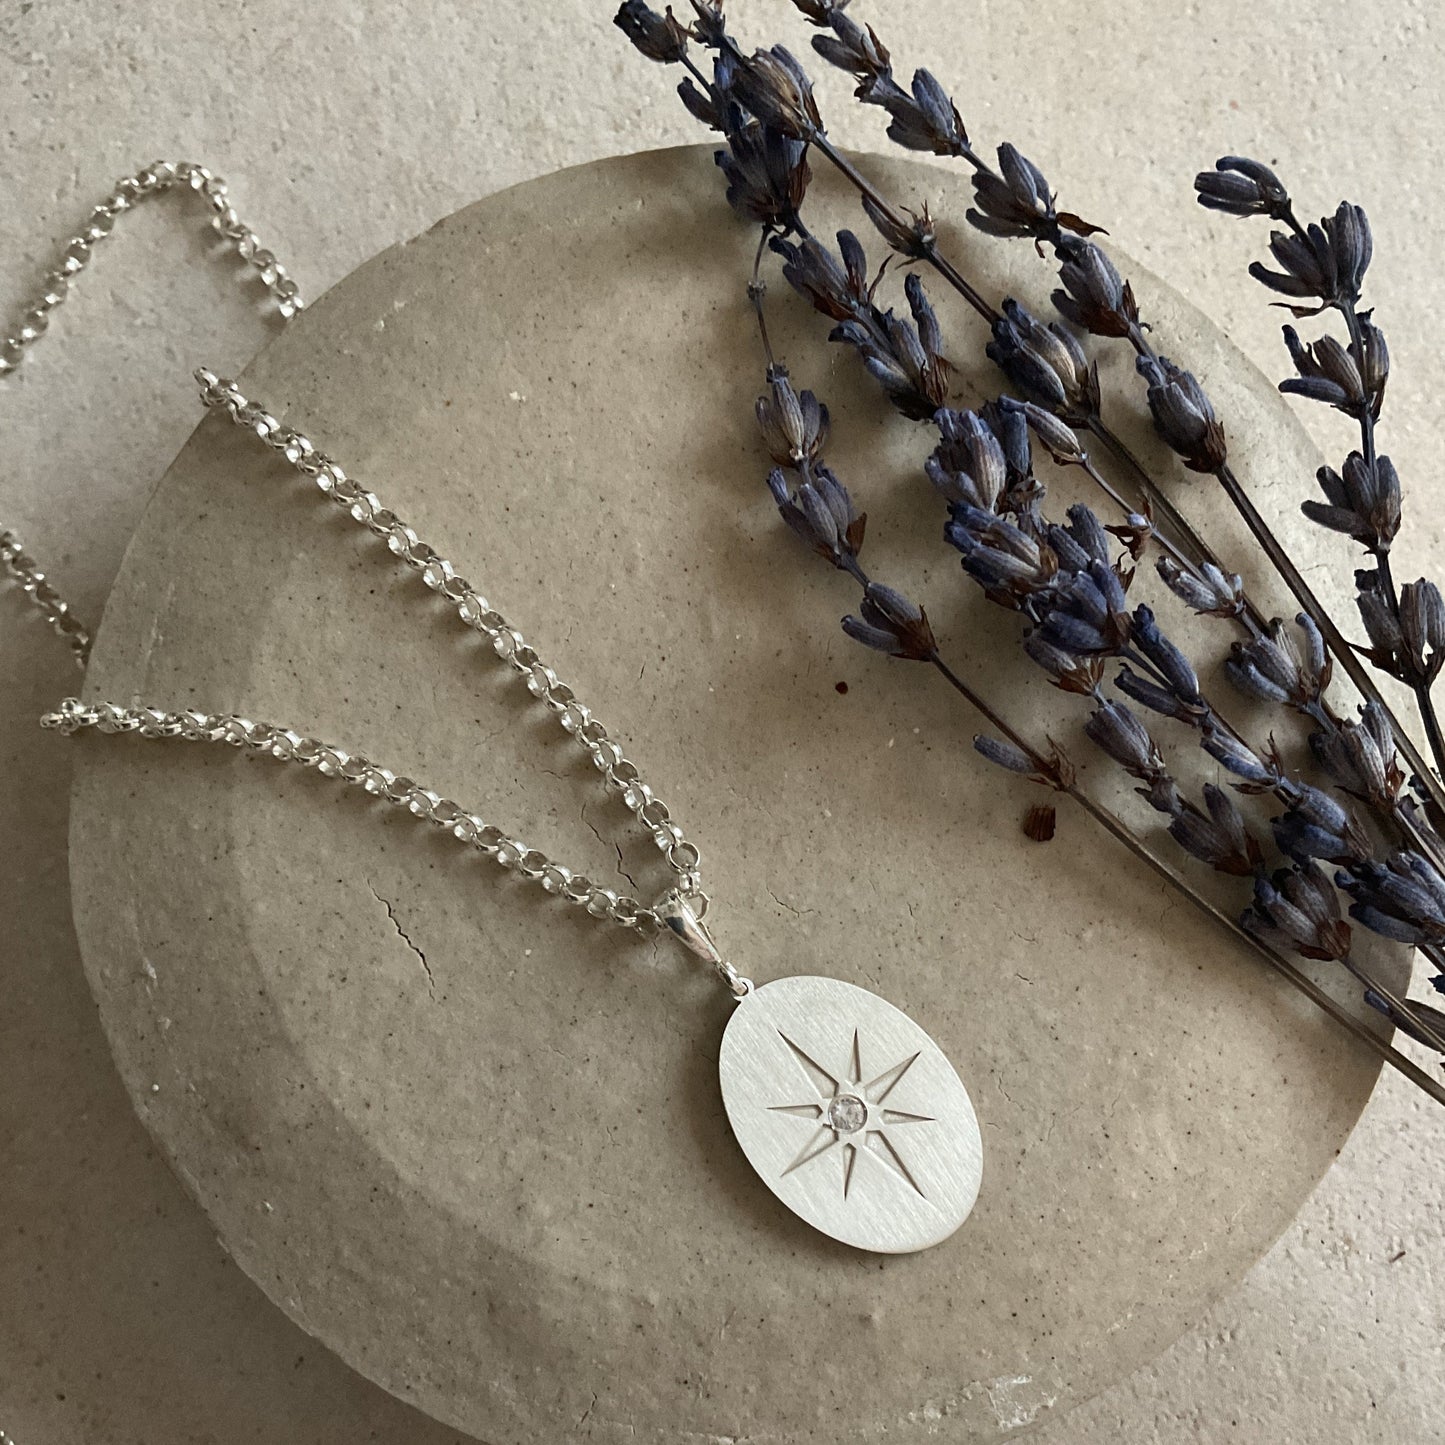 North Star Pendant Charm Necklace